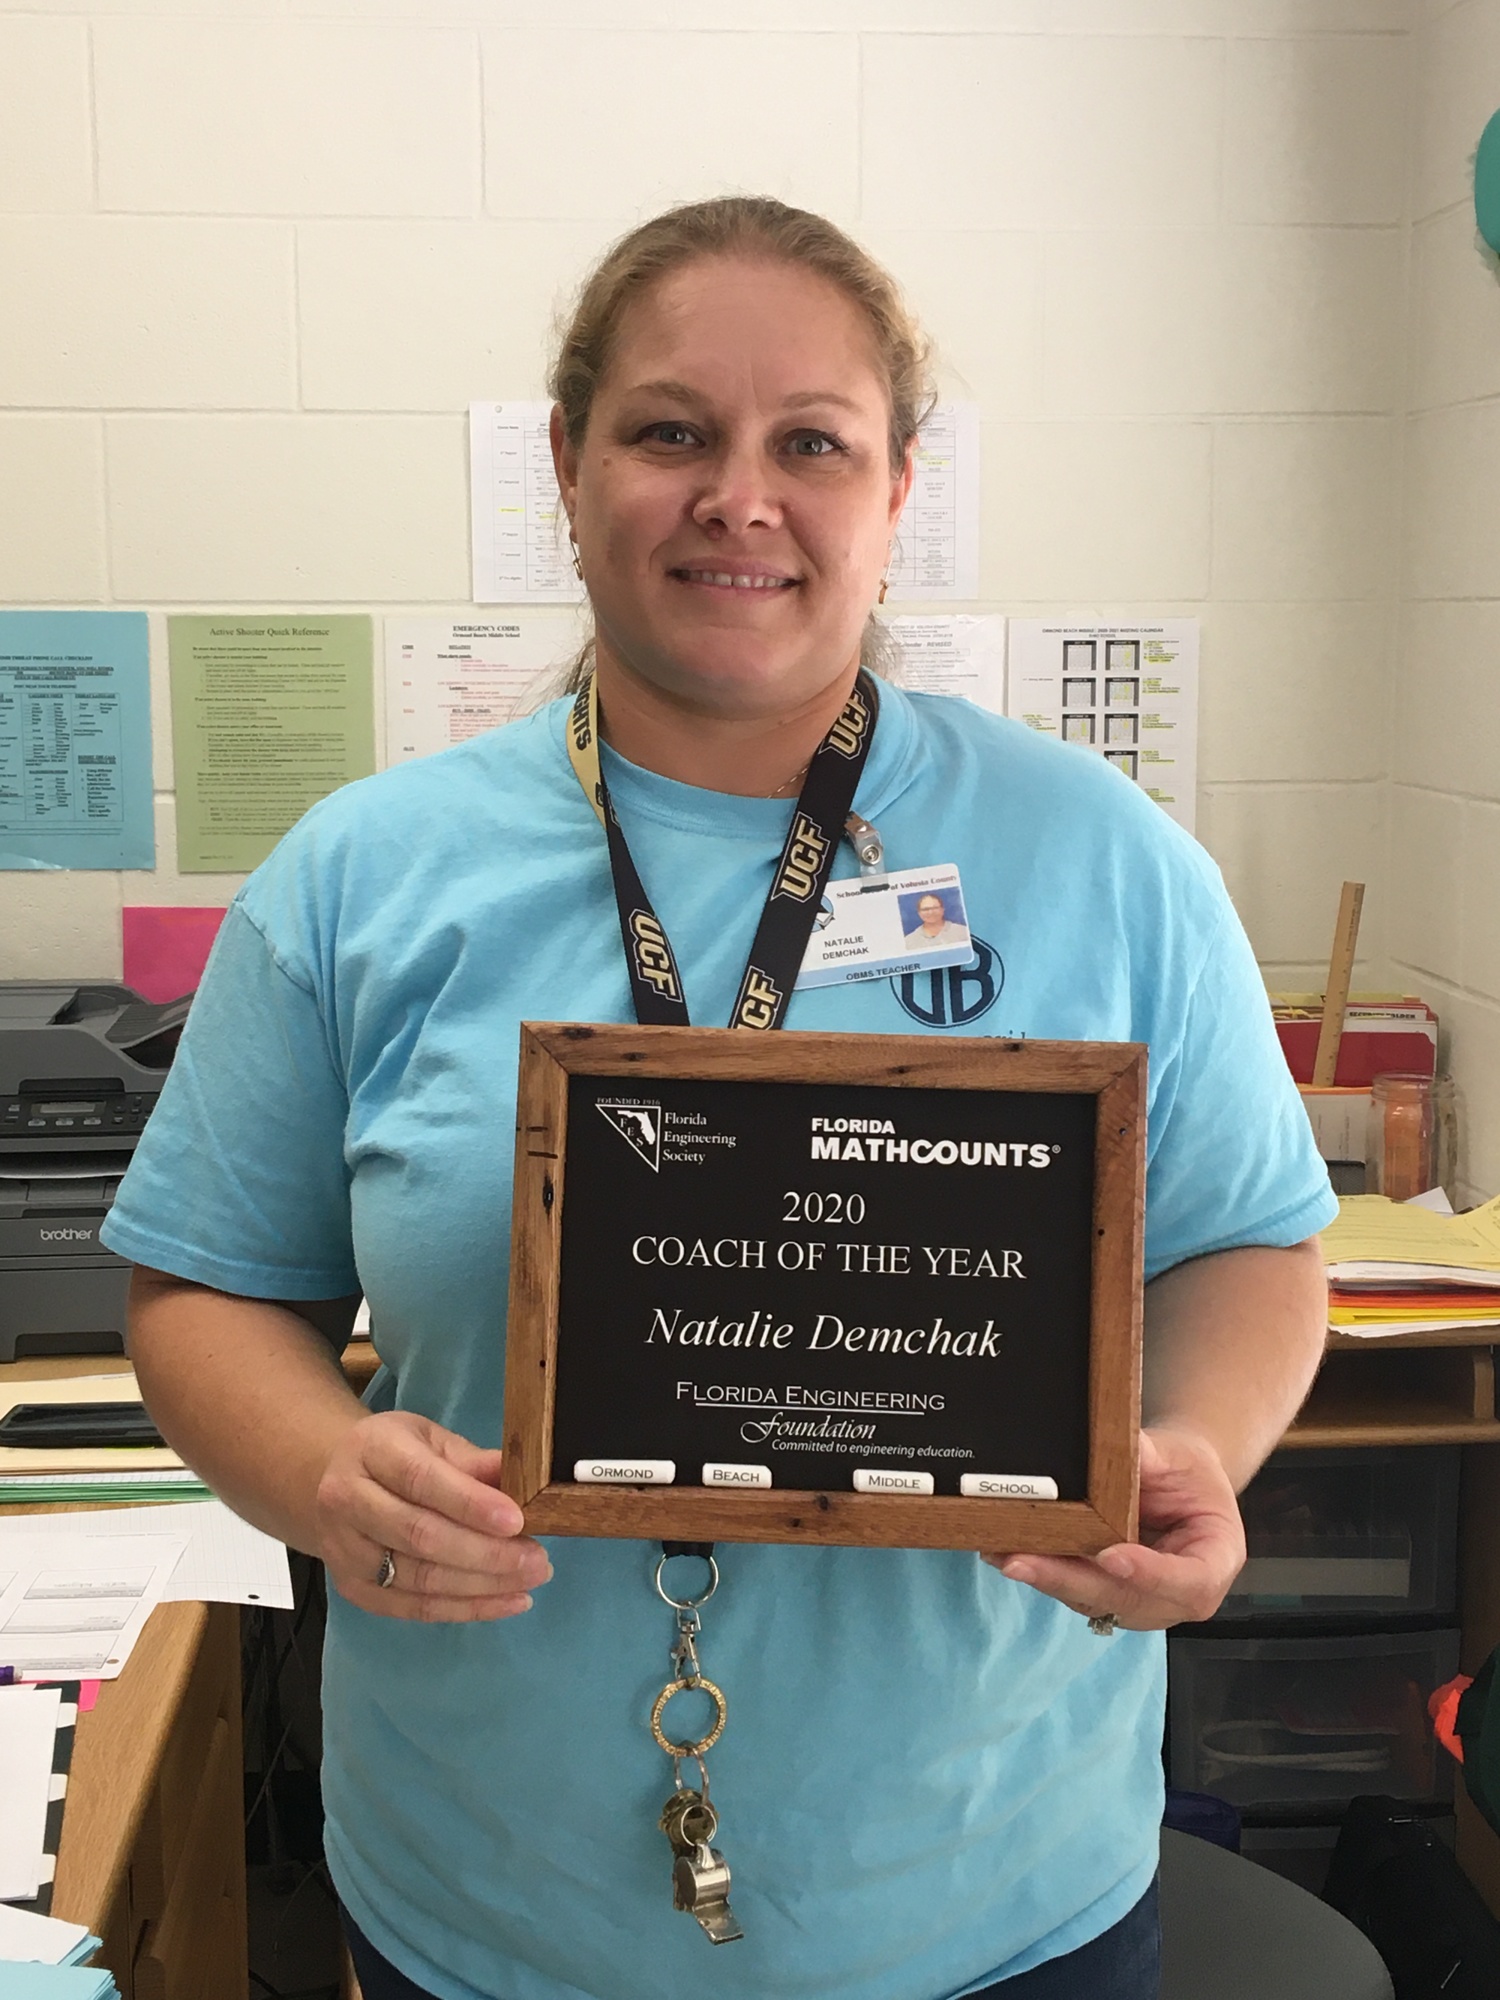 Natalie Demchak was named the 2020 Florida Mathcounts Coach of the Year. Courtesy photo